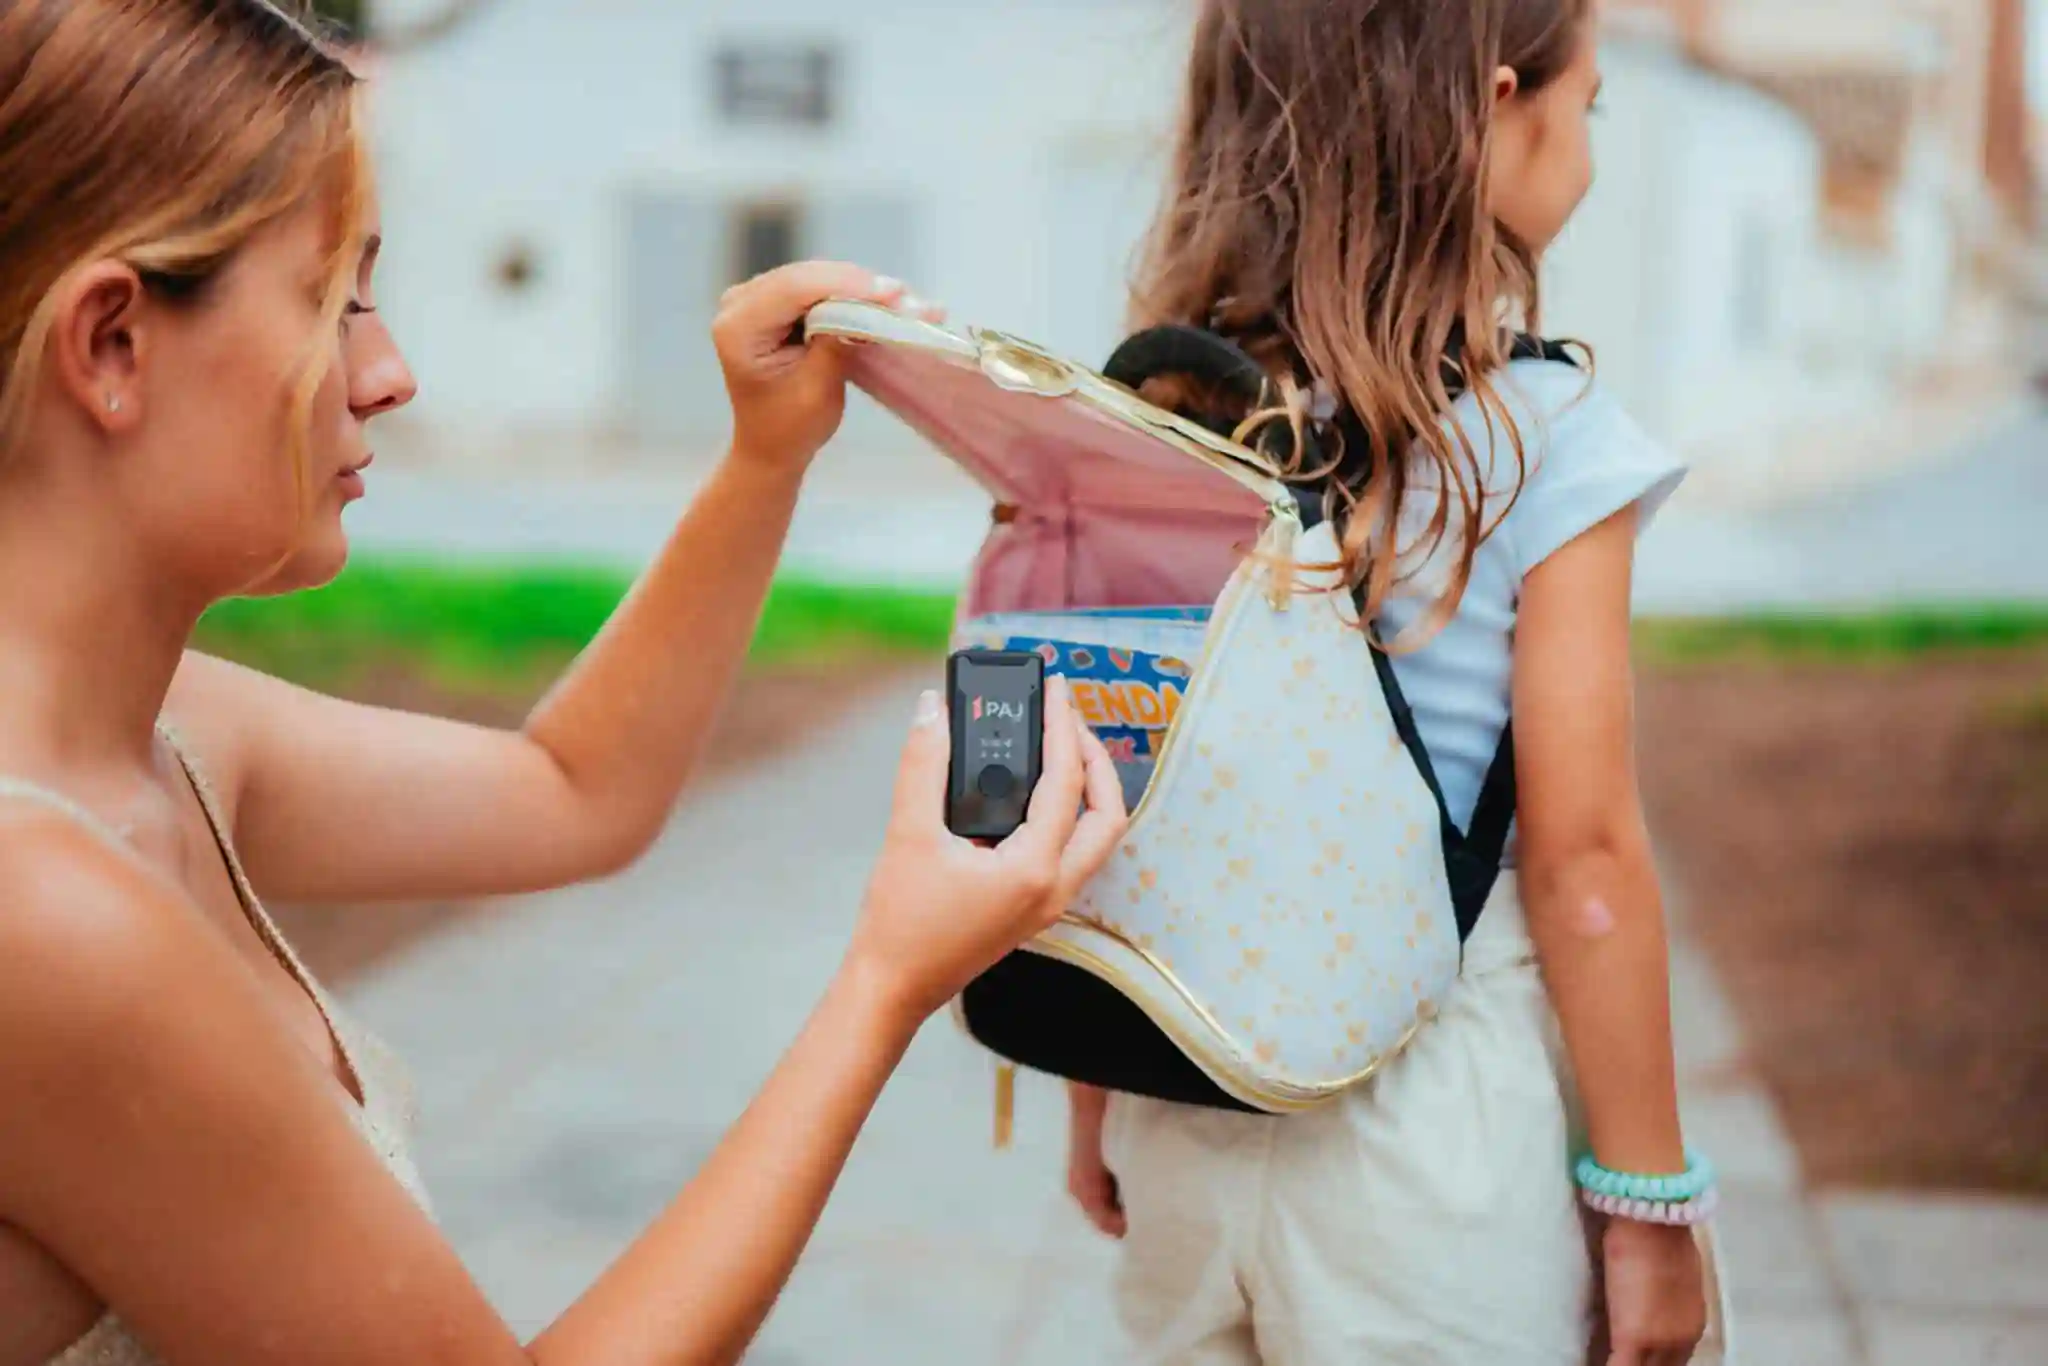 mother packing their kids back with Easy finder 4G GPS tracker